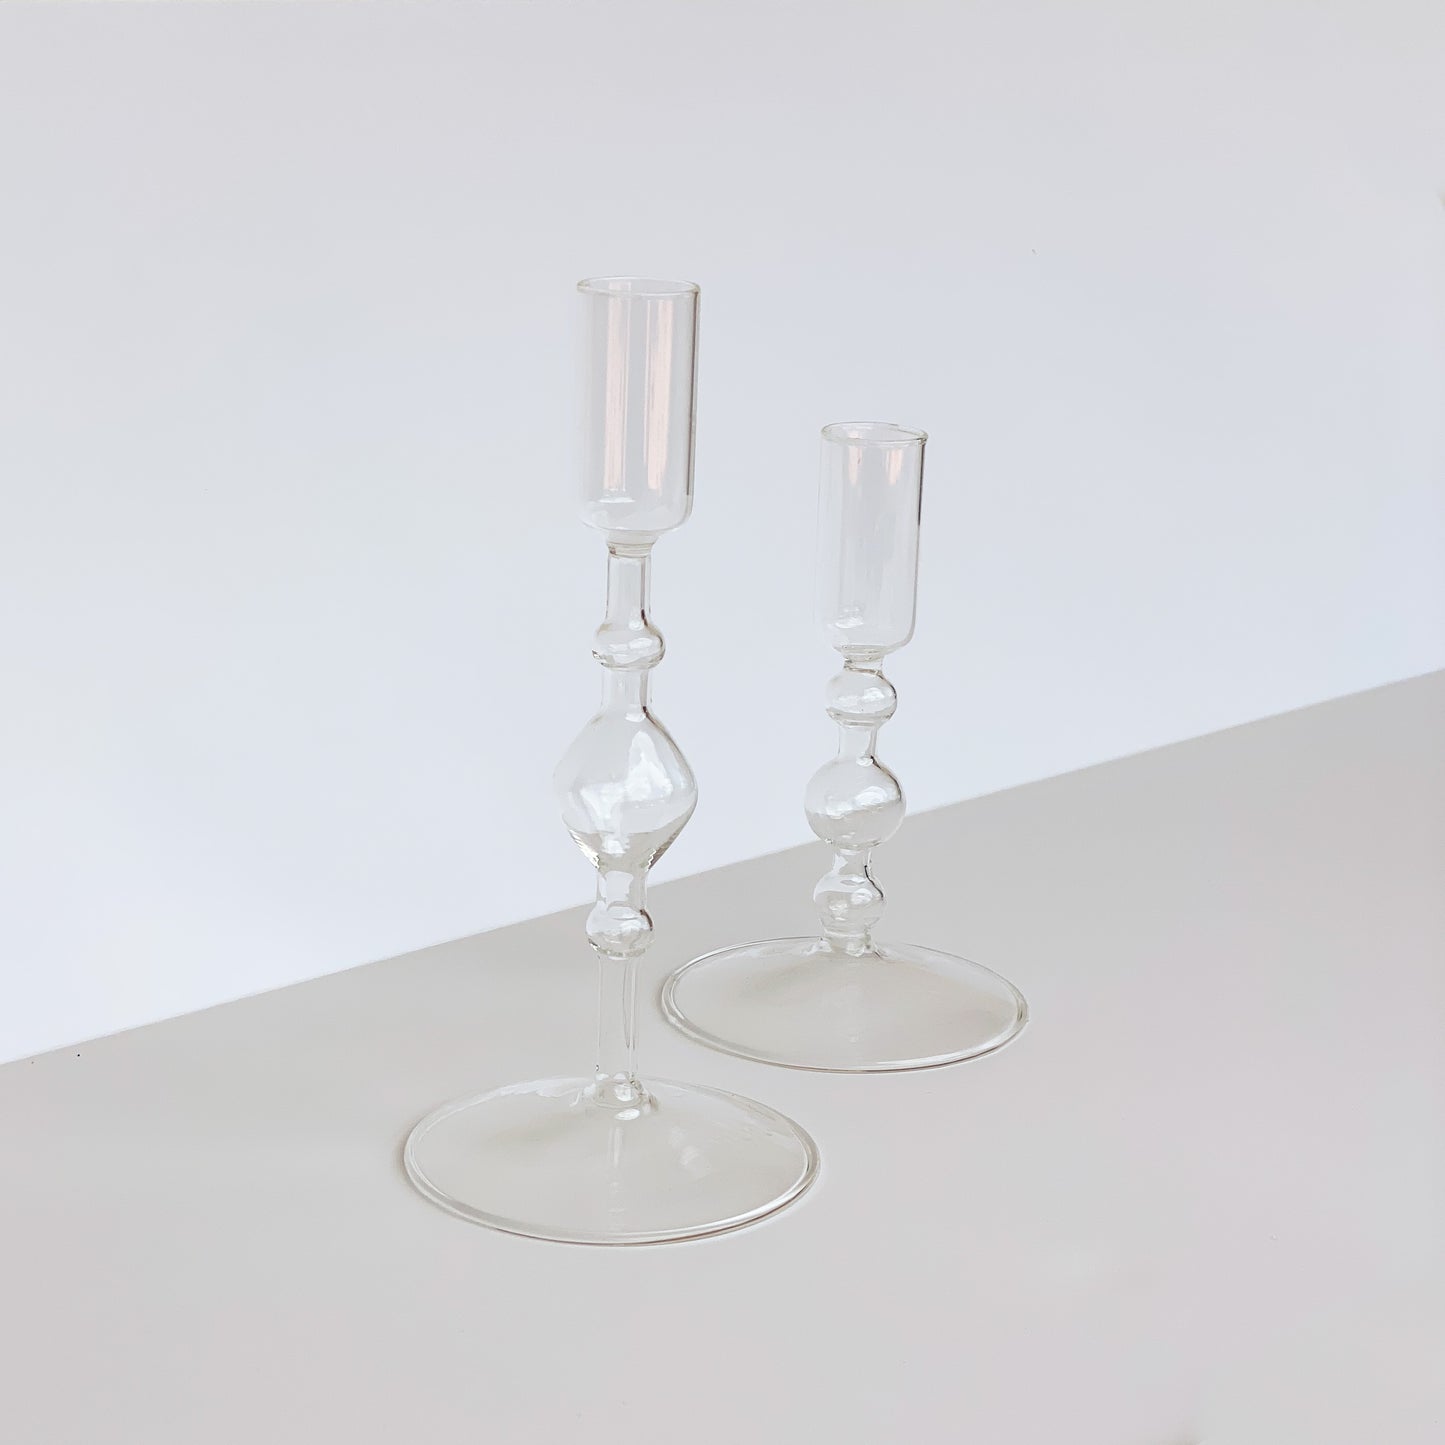 Two delicate clear glass candle holders of varying height with bulb detailing on the stem